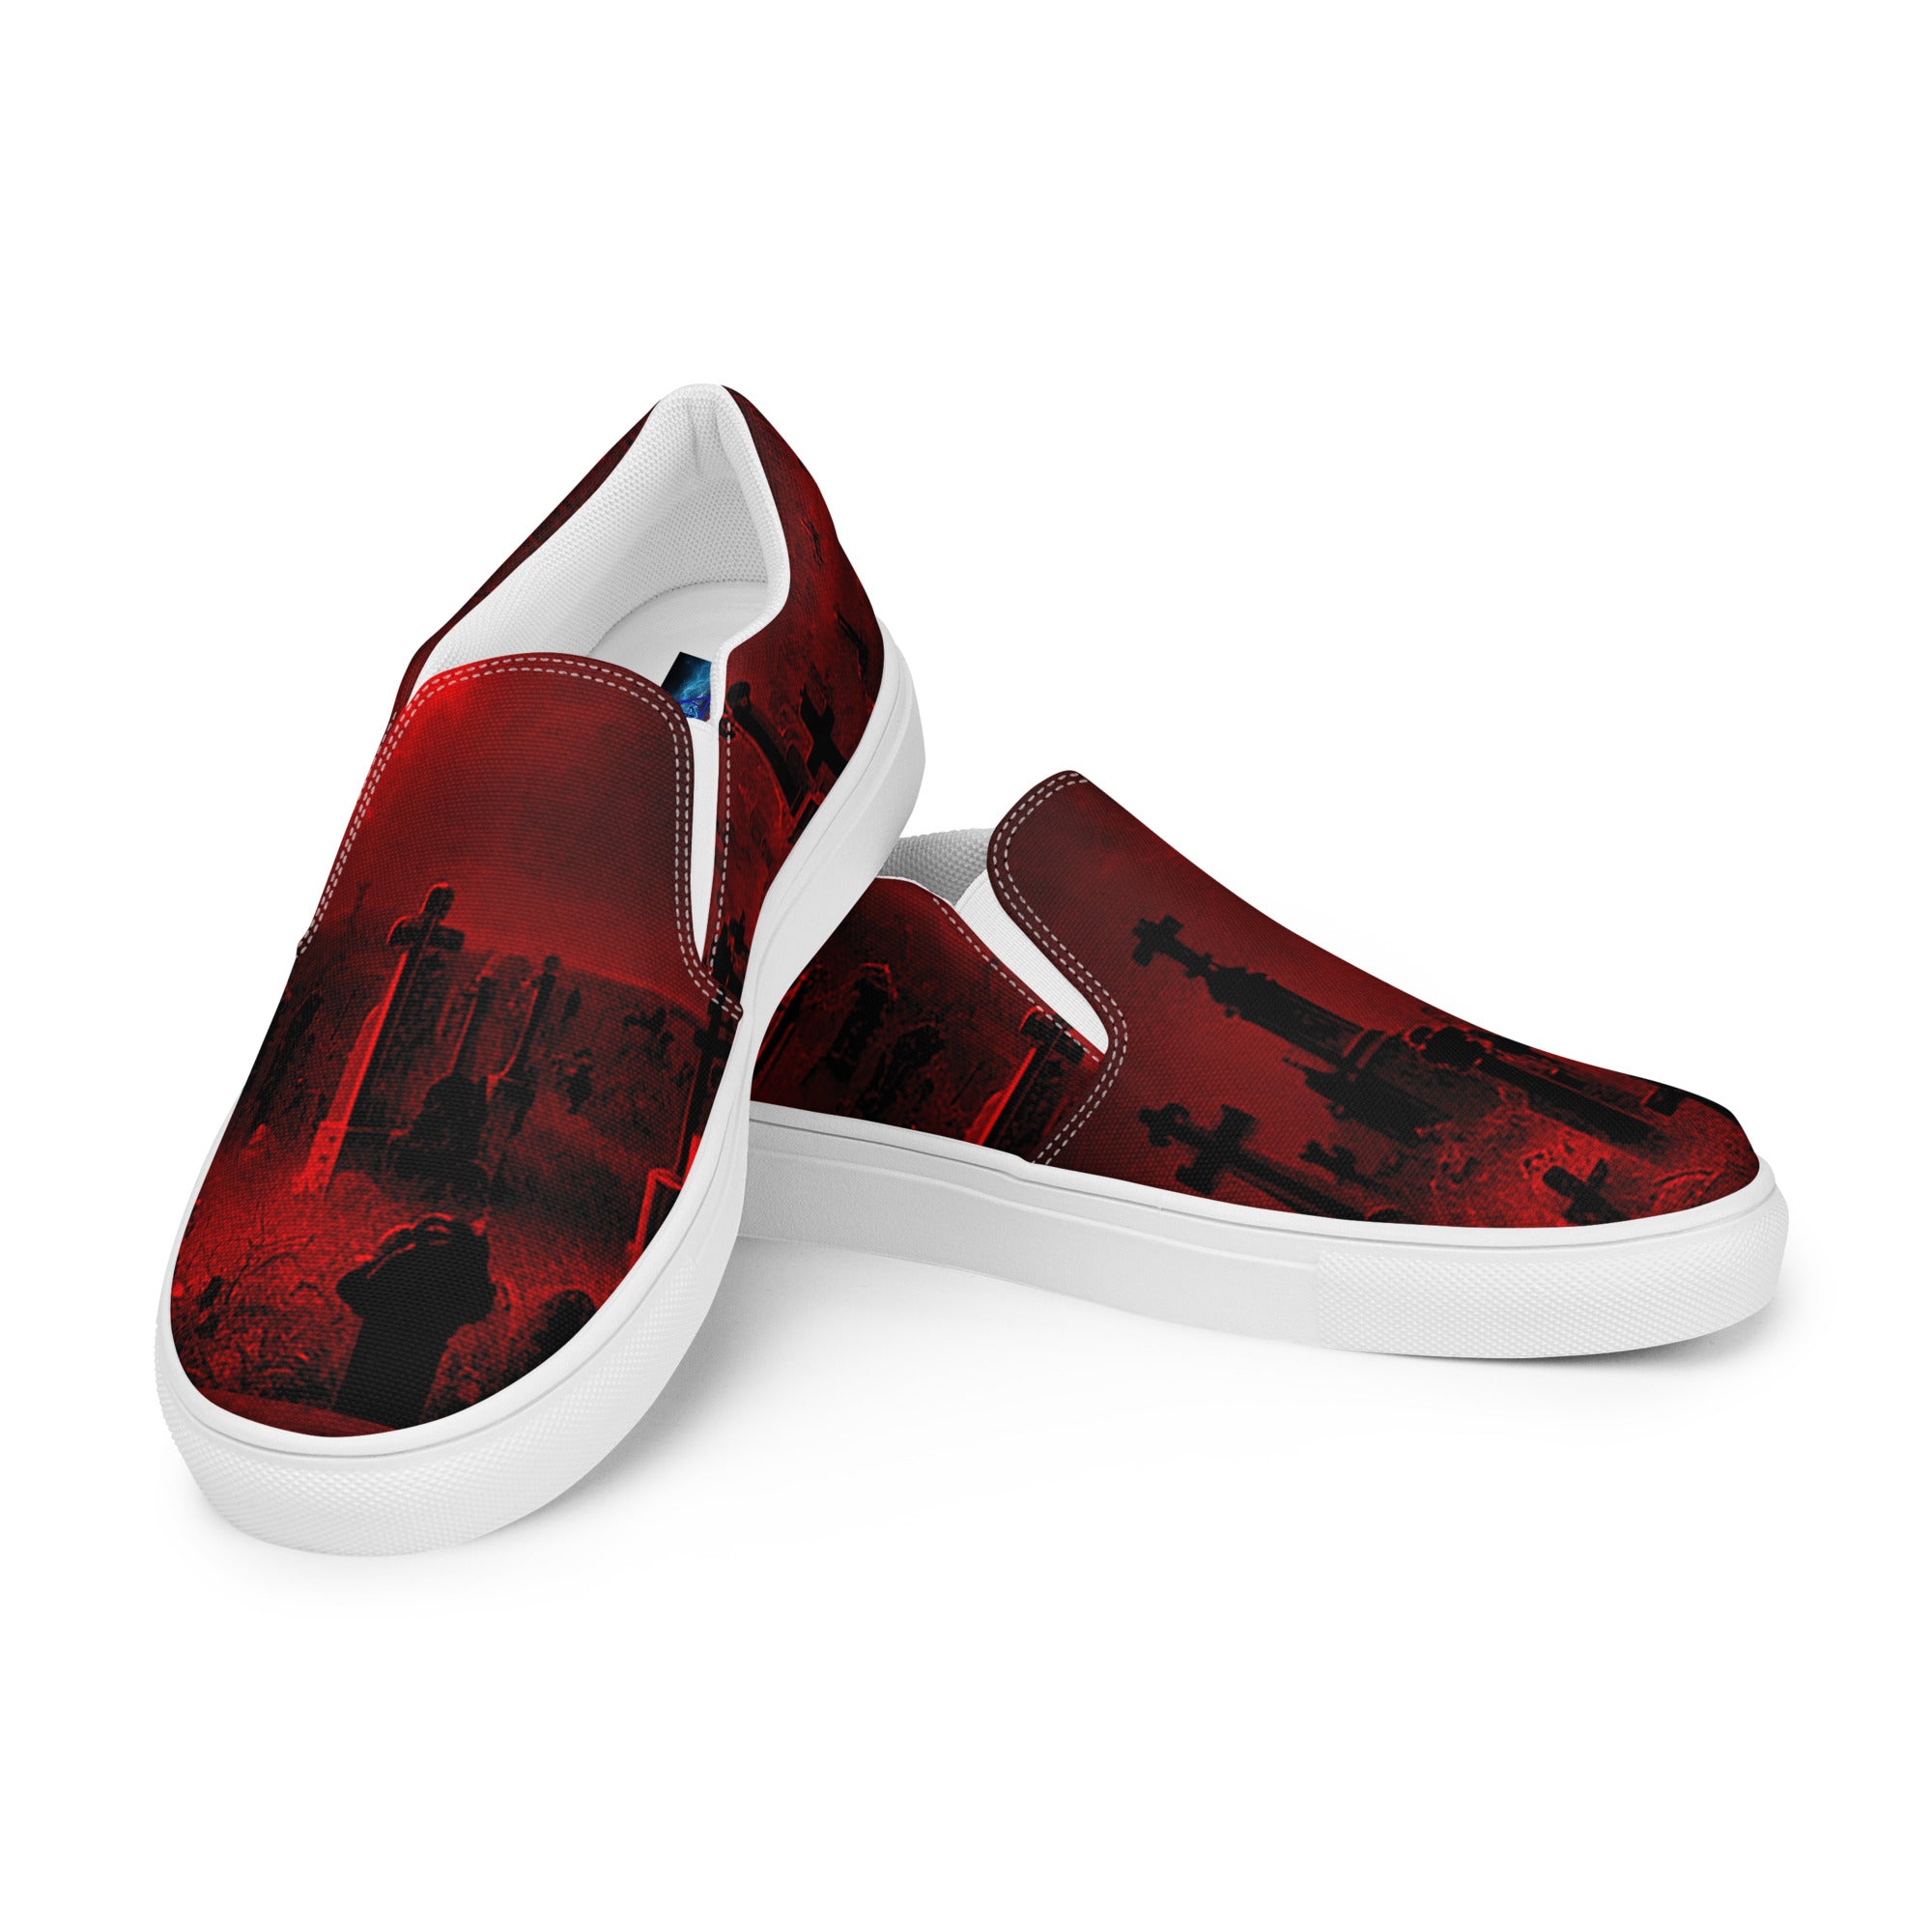 Blood Red Cemetery Tombstone Graveyard Scene Women’s slip-on canvas shoes